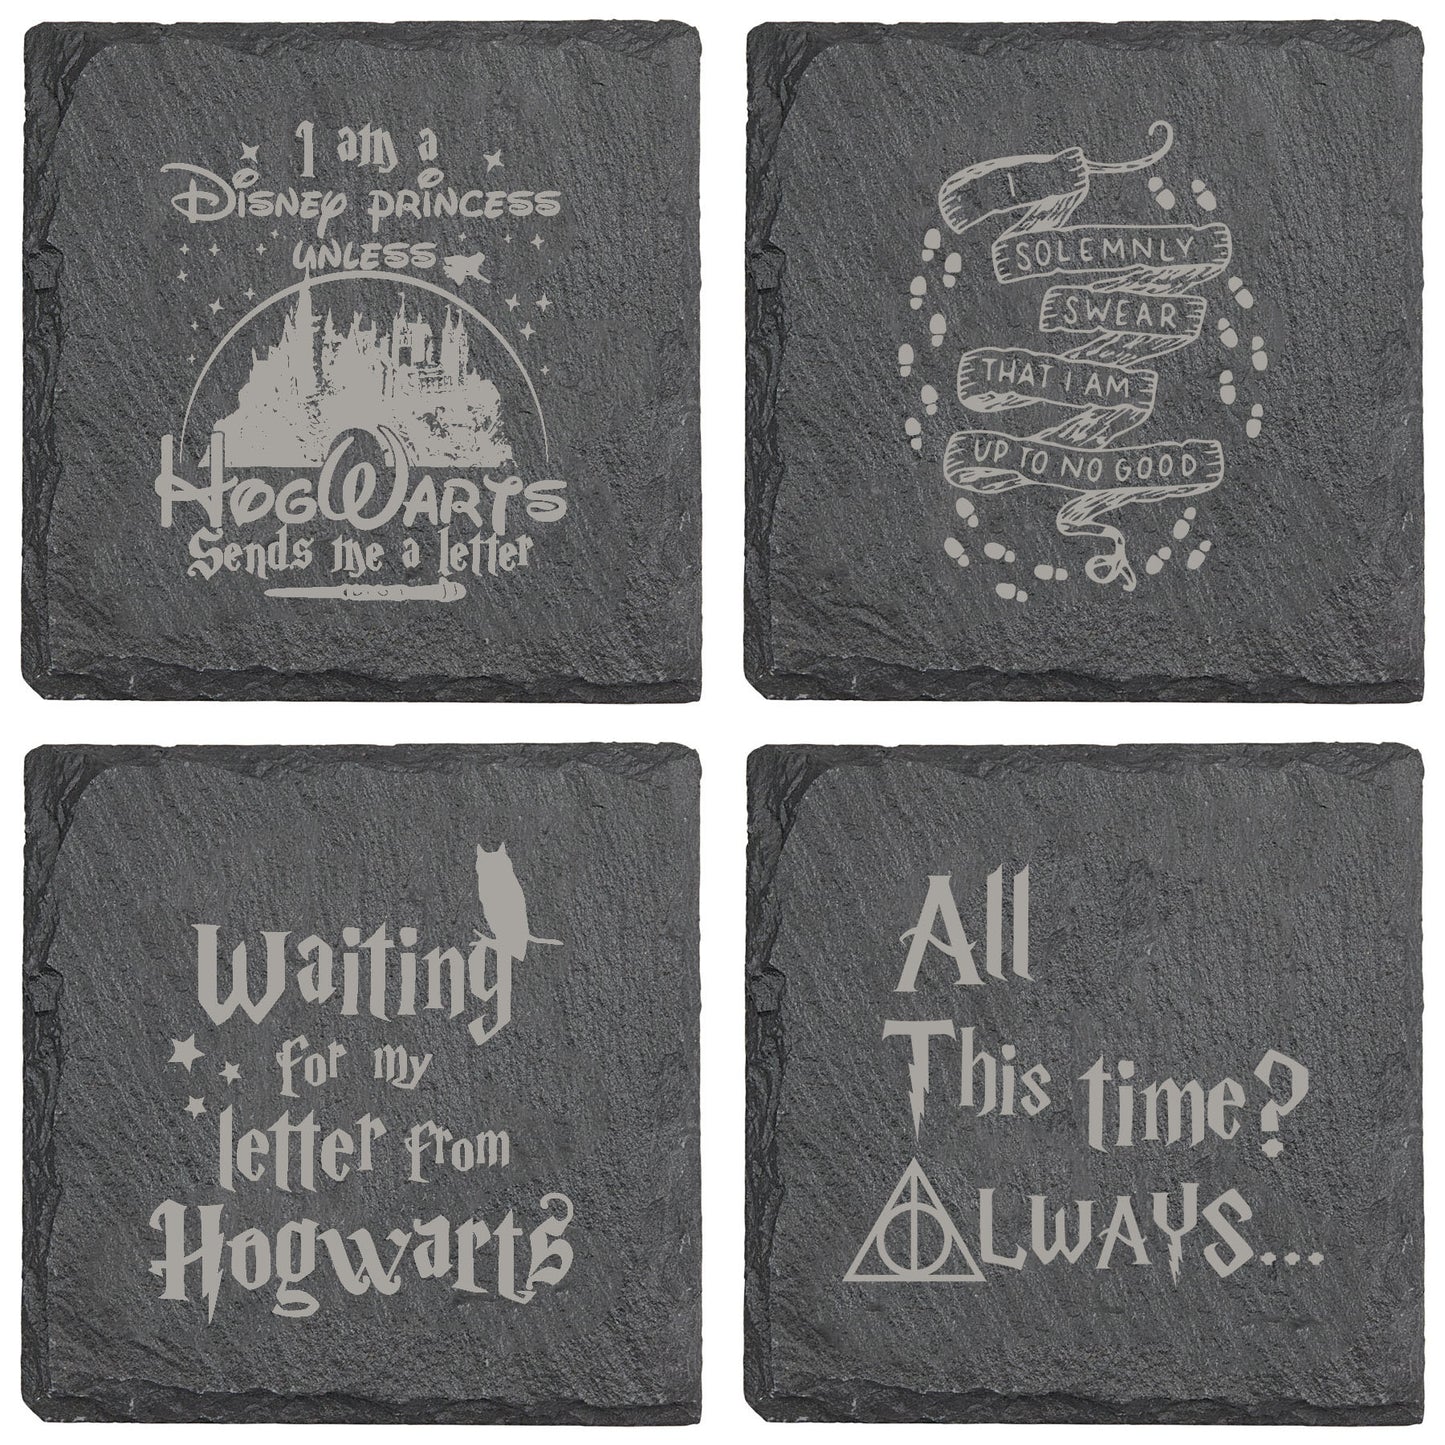 Harry Potter I Solemnly Swear That Am Up To No Good Slate Coaster